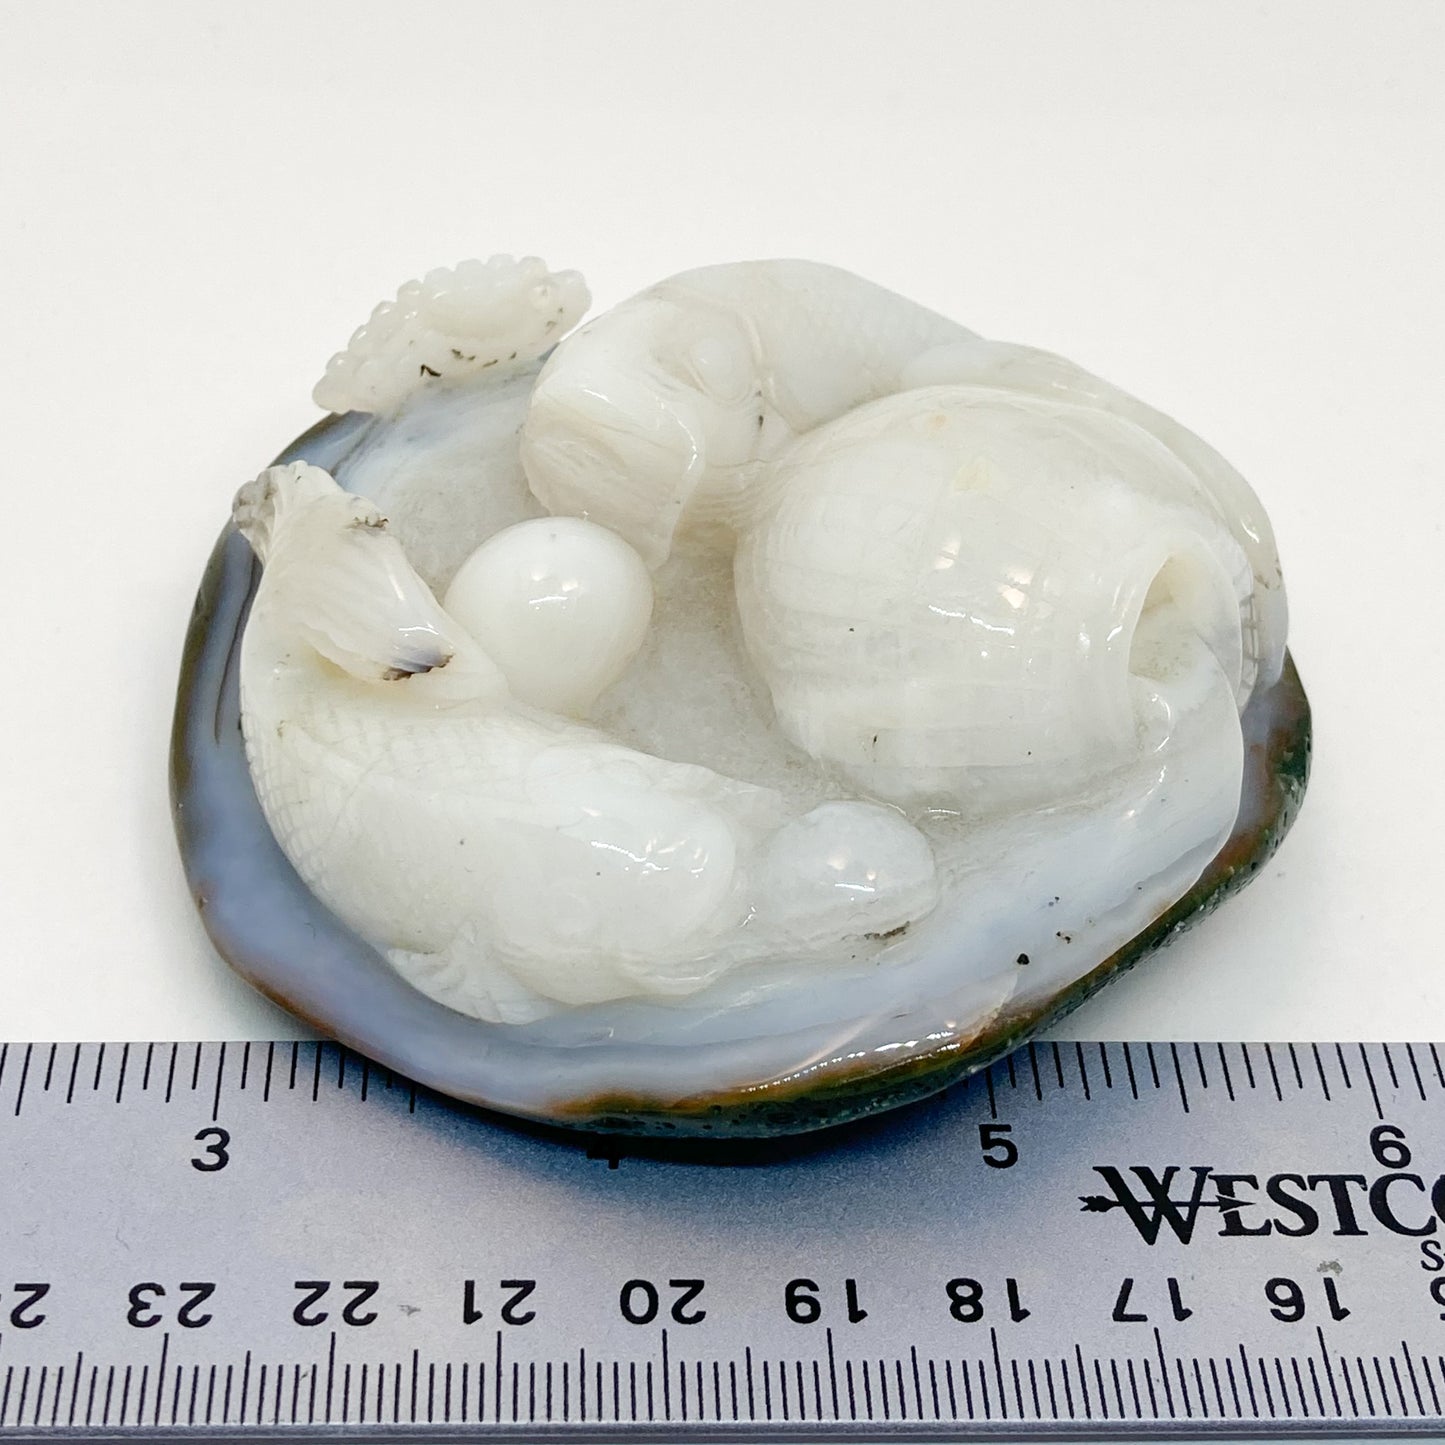 Carved White Agate Life Elixir Fish